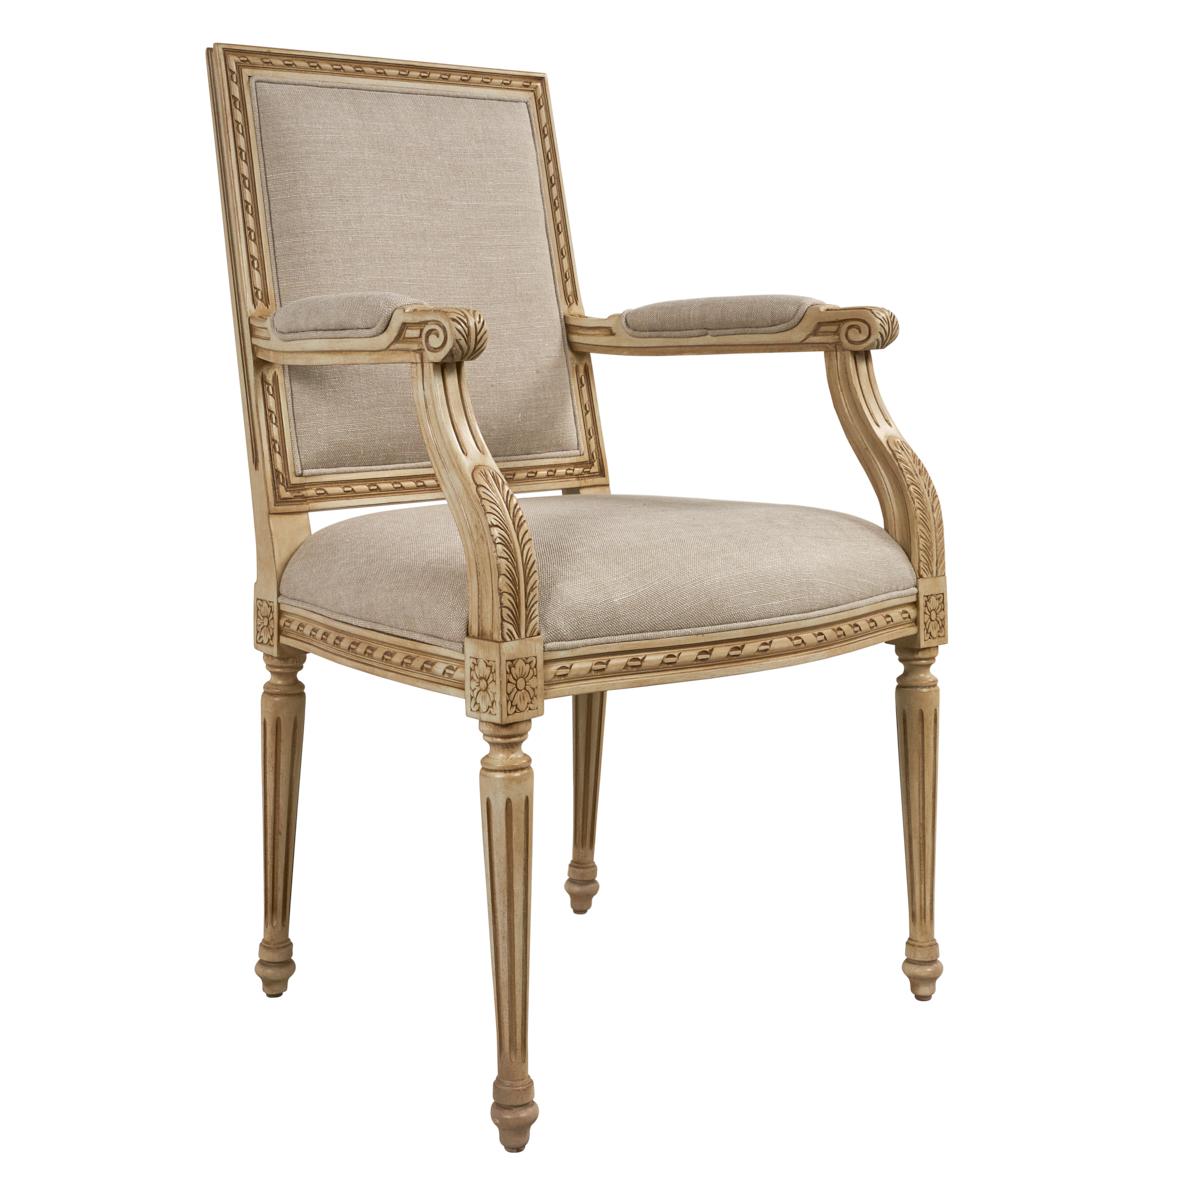 The Louis XVI chair is a classic, timeless silhouette that features a hand-carved European beechwood frame and fluted legs.

Since Schumacher was founded in 1889, our family-owned company has been synonymous with style, taste, and innovation. A